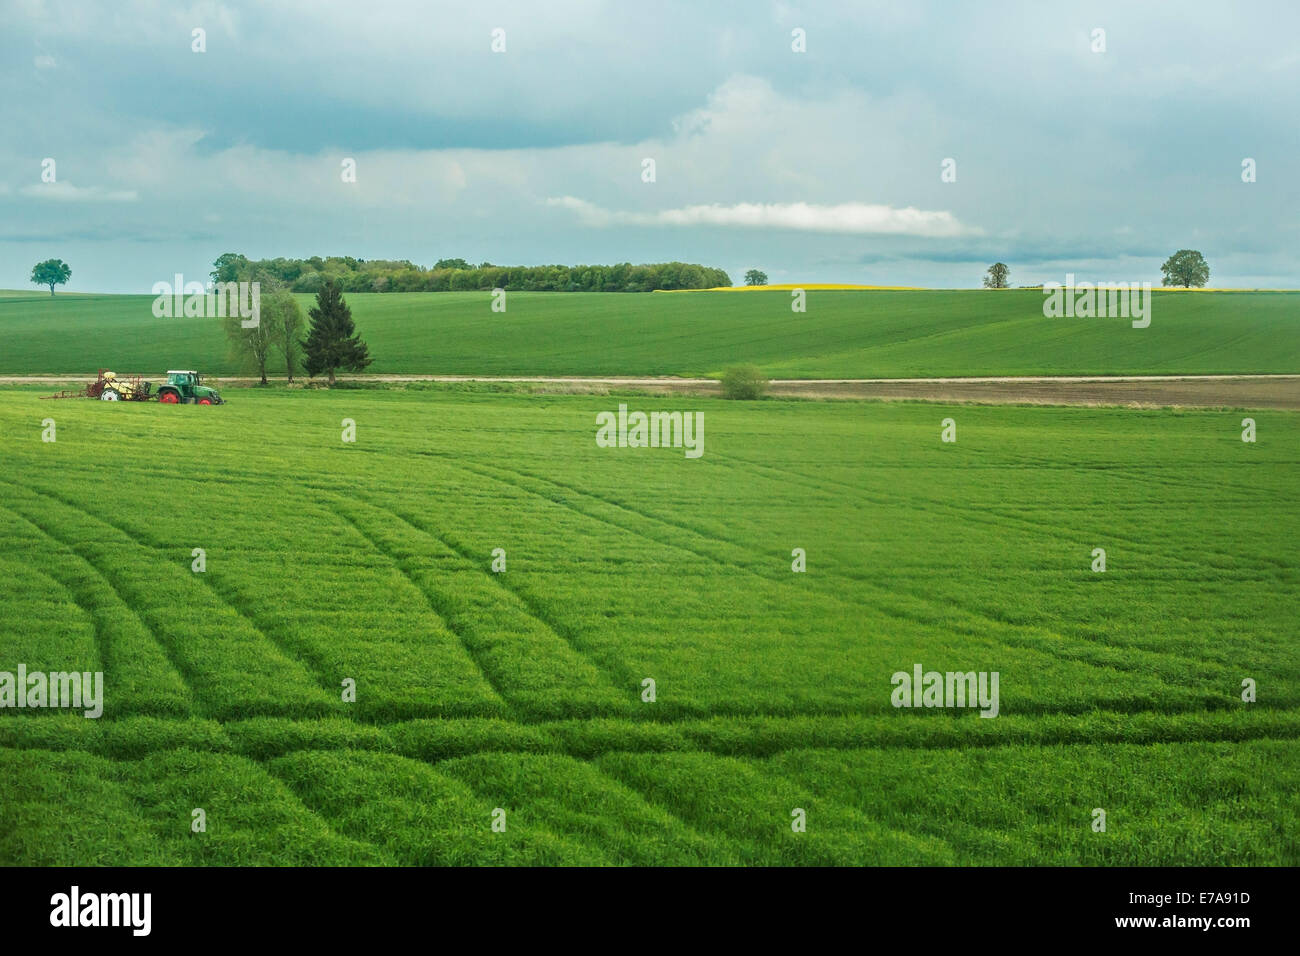 Tranquil scene of agricultural landscape Stock Photo